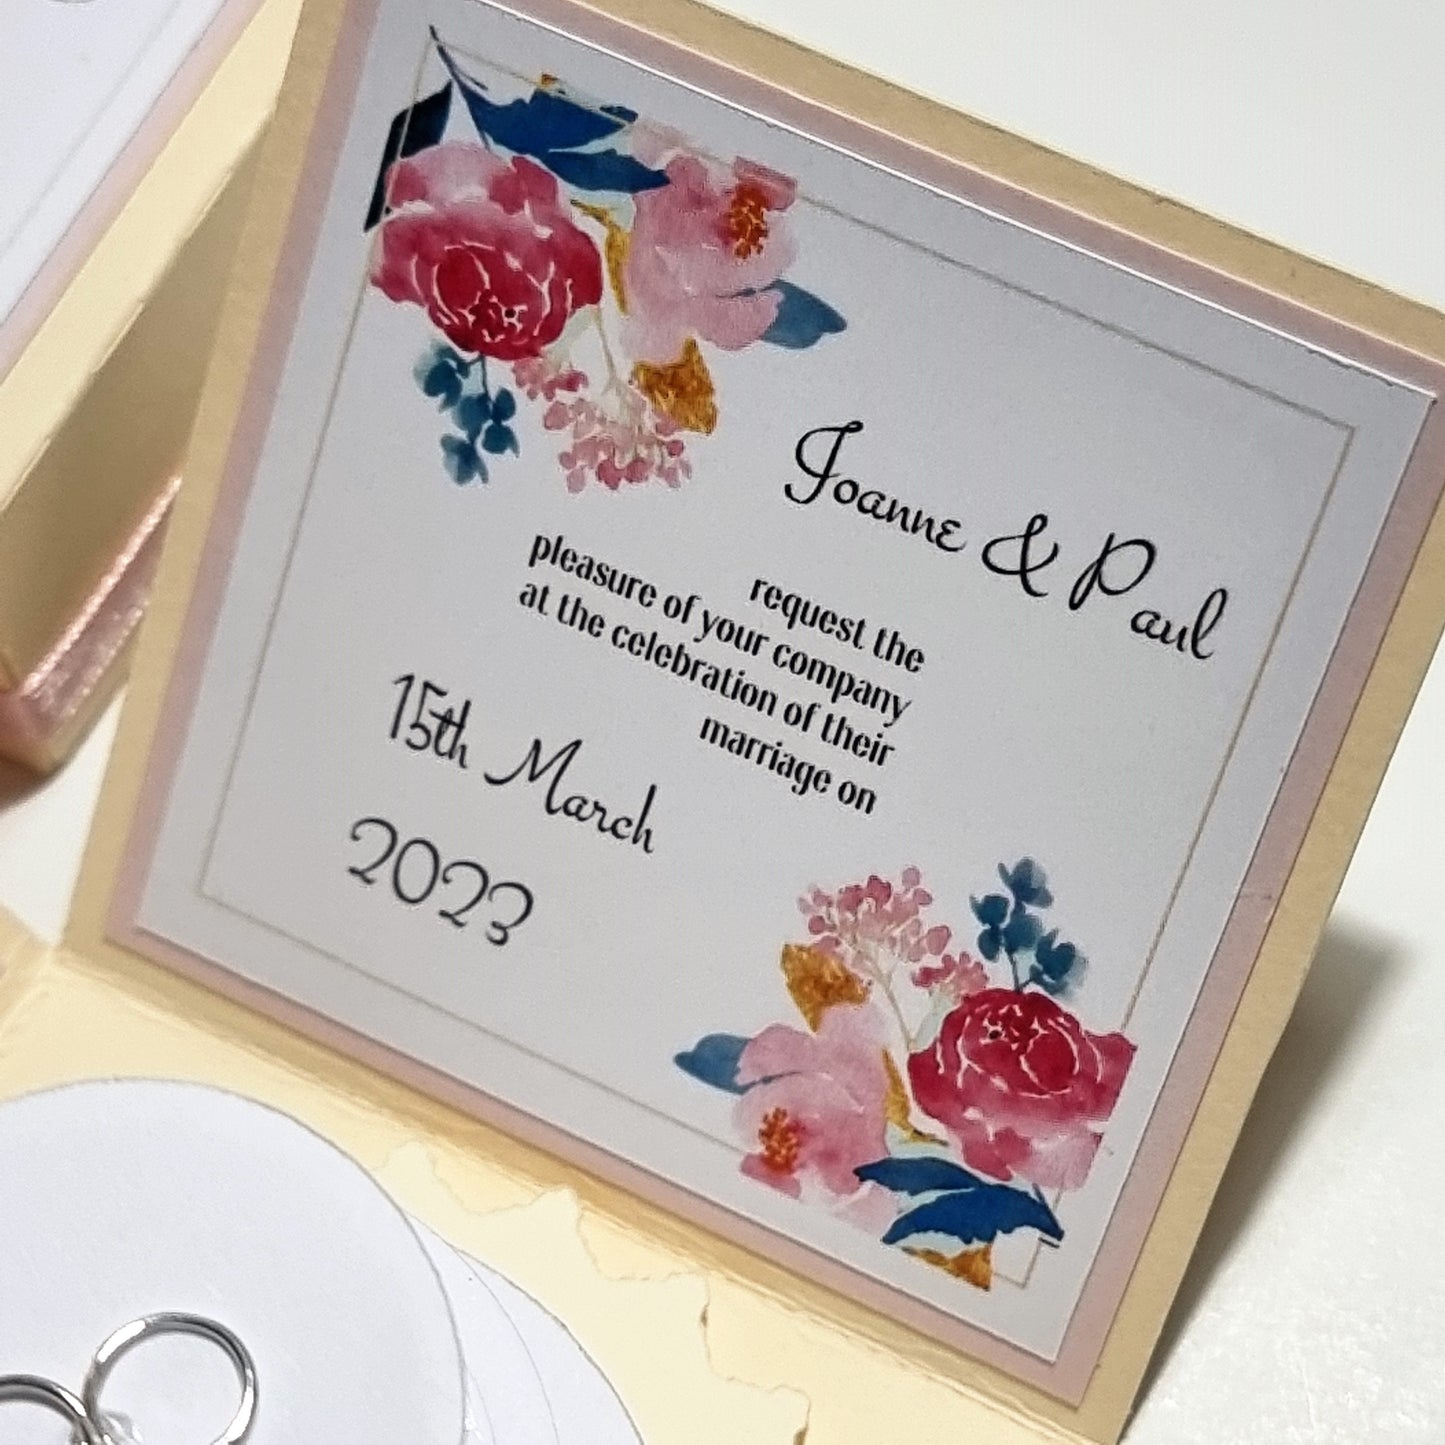 Bohemian Styled Exploding Wedding Invitations do contain a few of the design elements from the Hearts &amp; Doves range however the biggest difference is laid back styling with Central Circular three-tier Wedding cake. The Box is finished off in pastel colours to add a more relaxed feeling. Florals